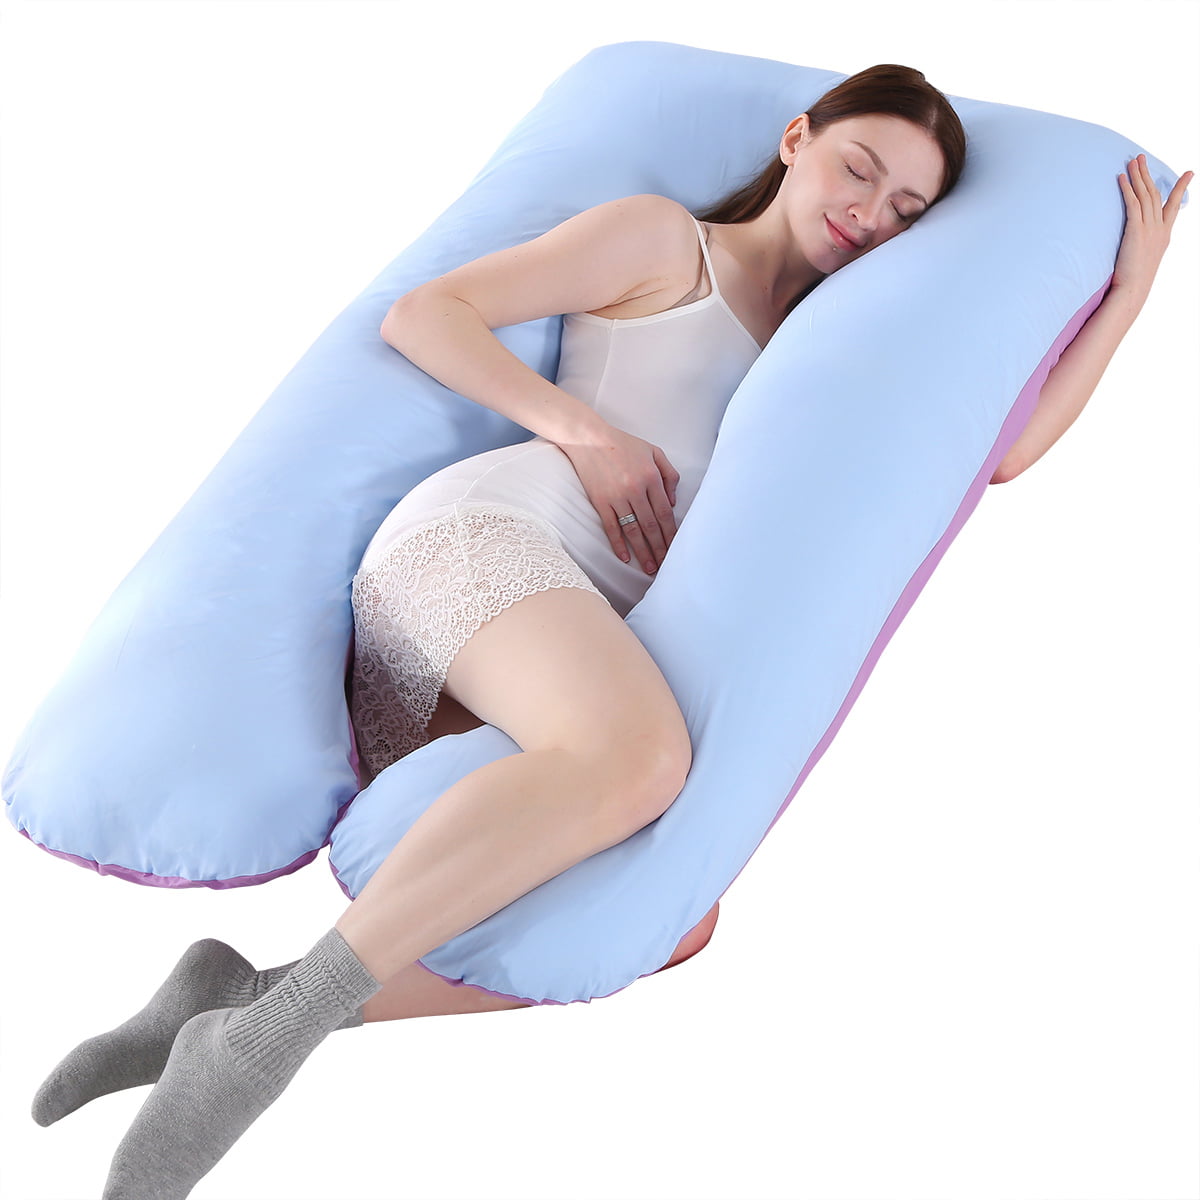 27.5*57inch Pregnancy Pillow Maternity Full Body Support w/ Knitted Cotton Cover